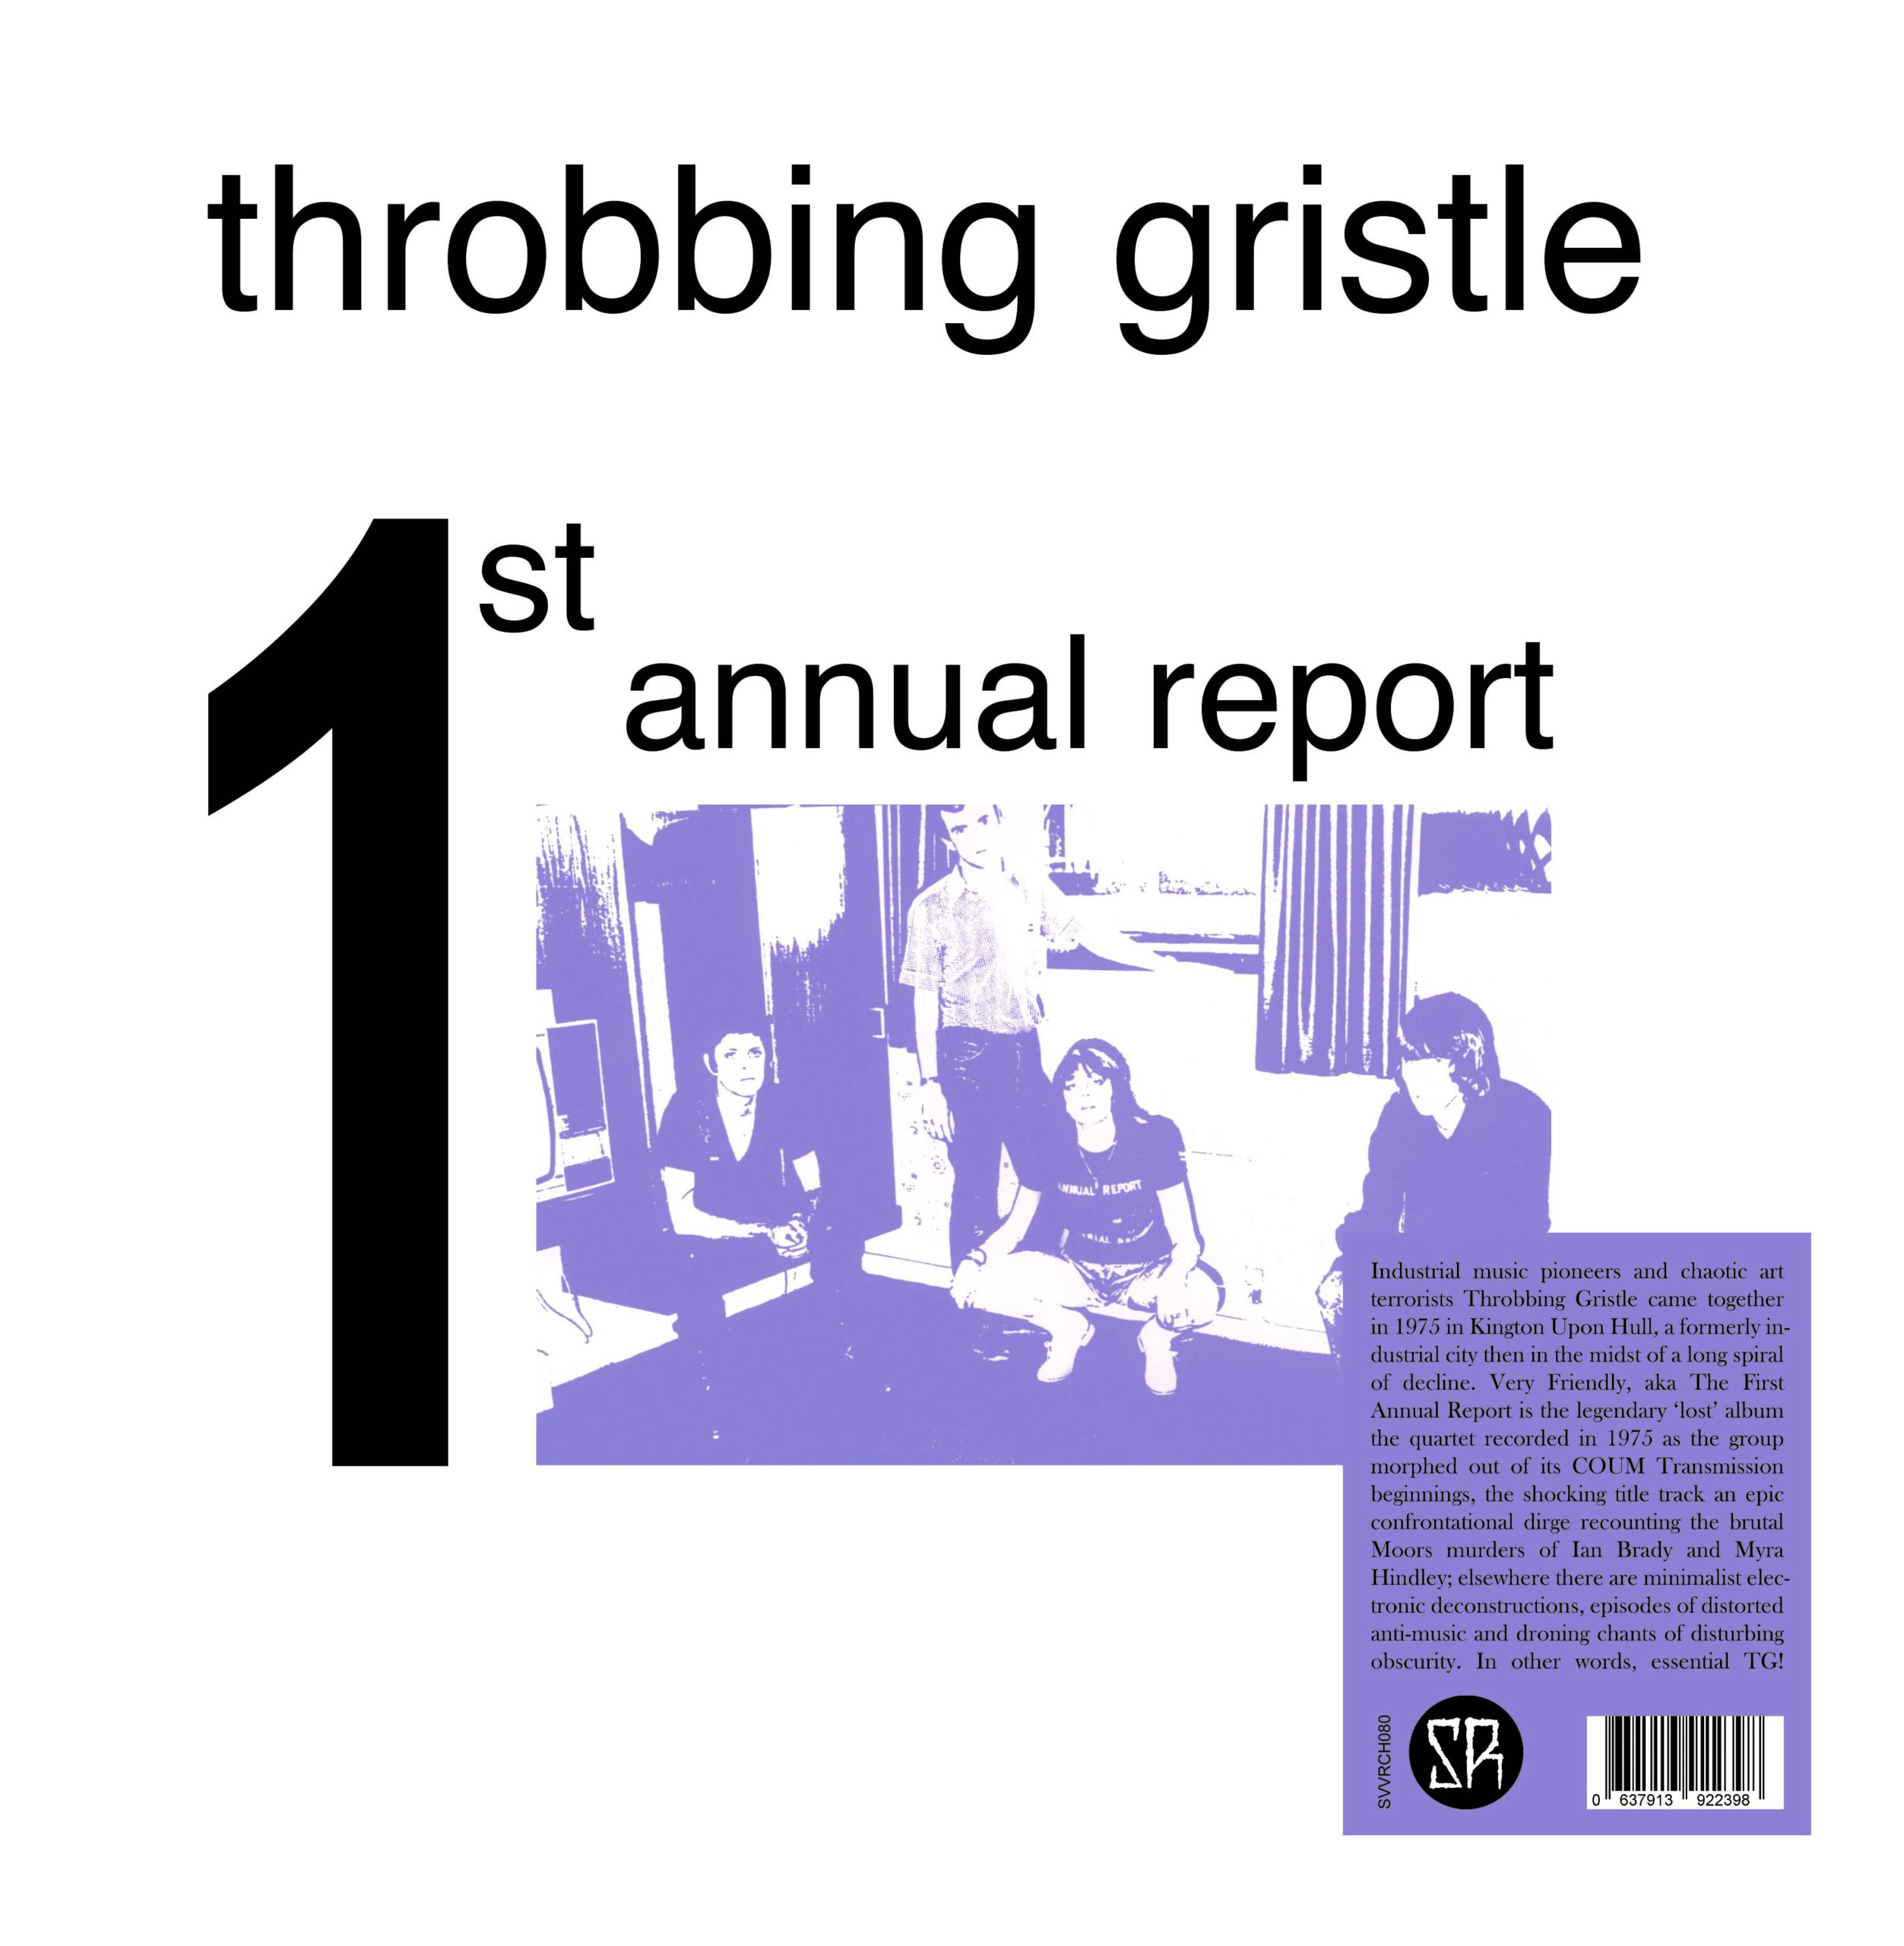 THE FIRST ANNUAL REPORT